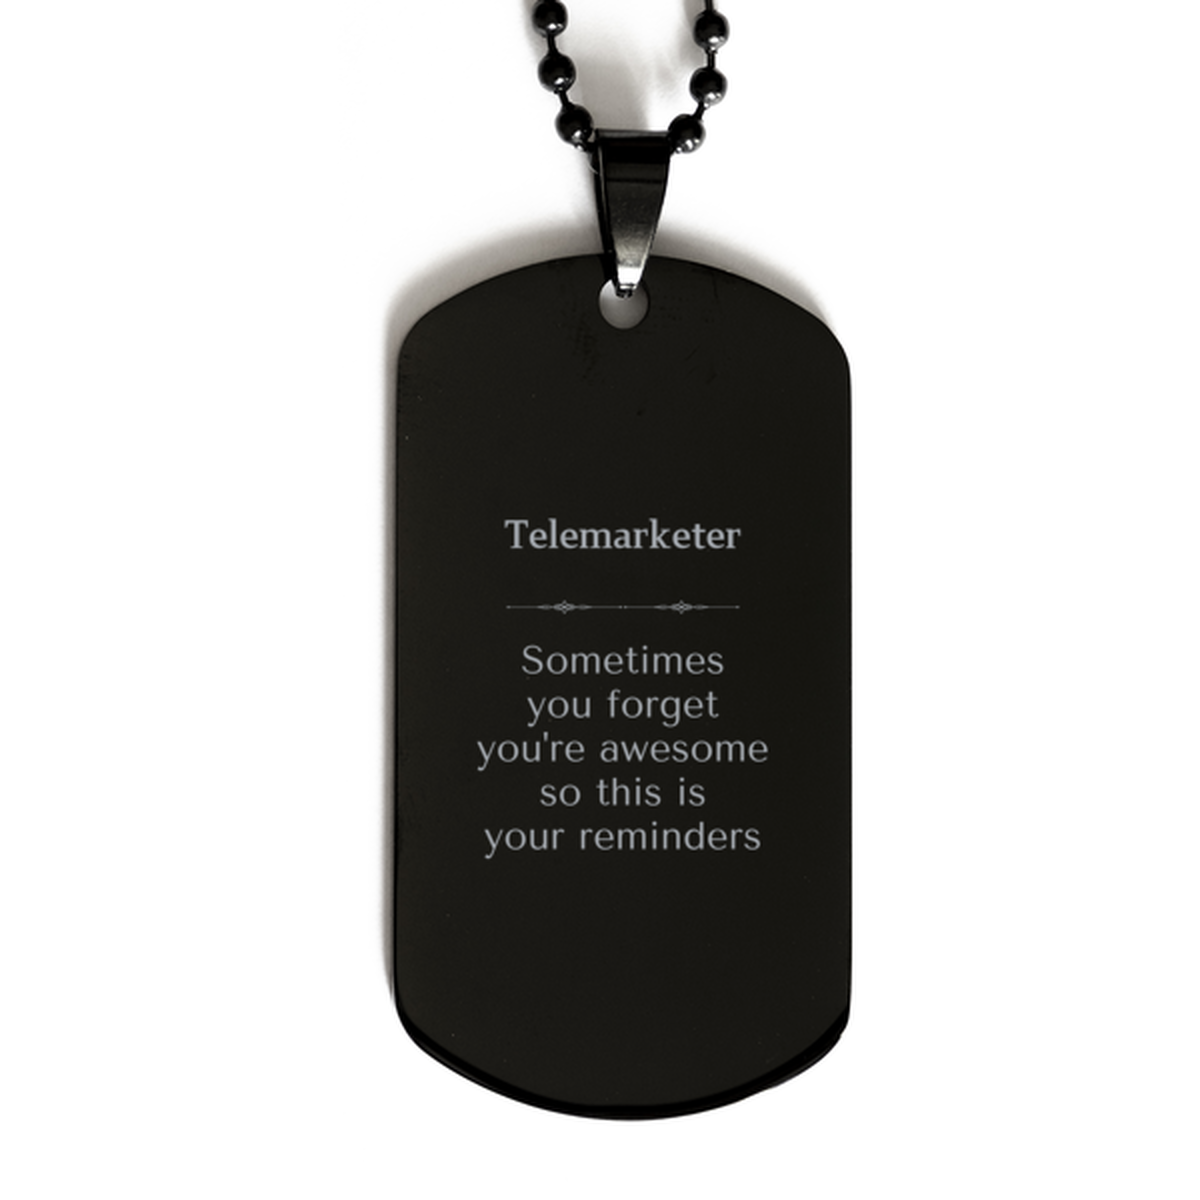 Sentimental Telemarketer Black Dog Tag, Telemarketer Sometimes you forget you're awesome so this is your reminders, Graduation Christmas Birthday Gifts for Telemarketer, Men, Women, Coworkers